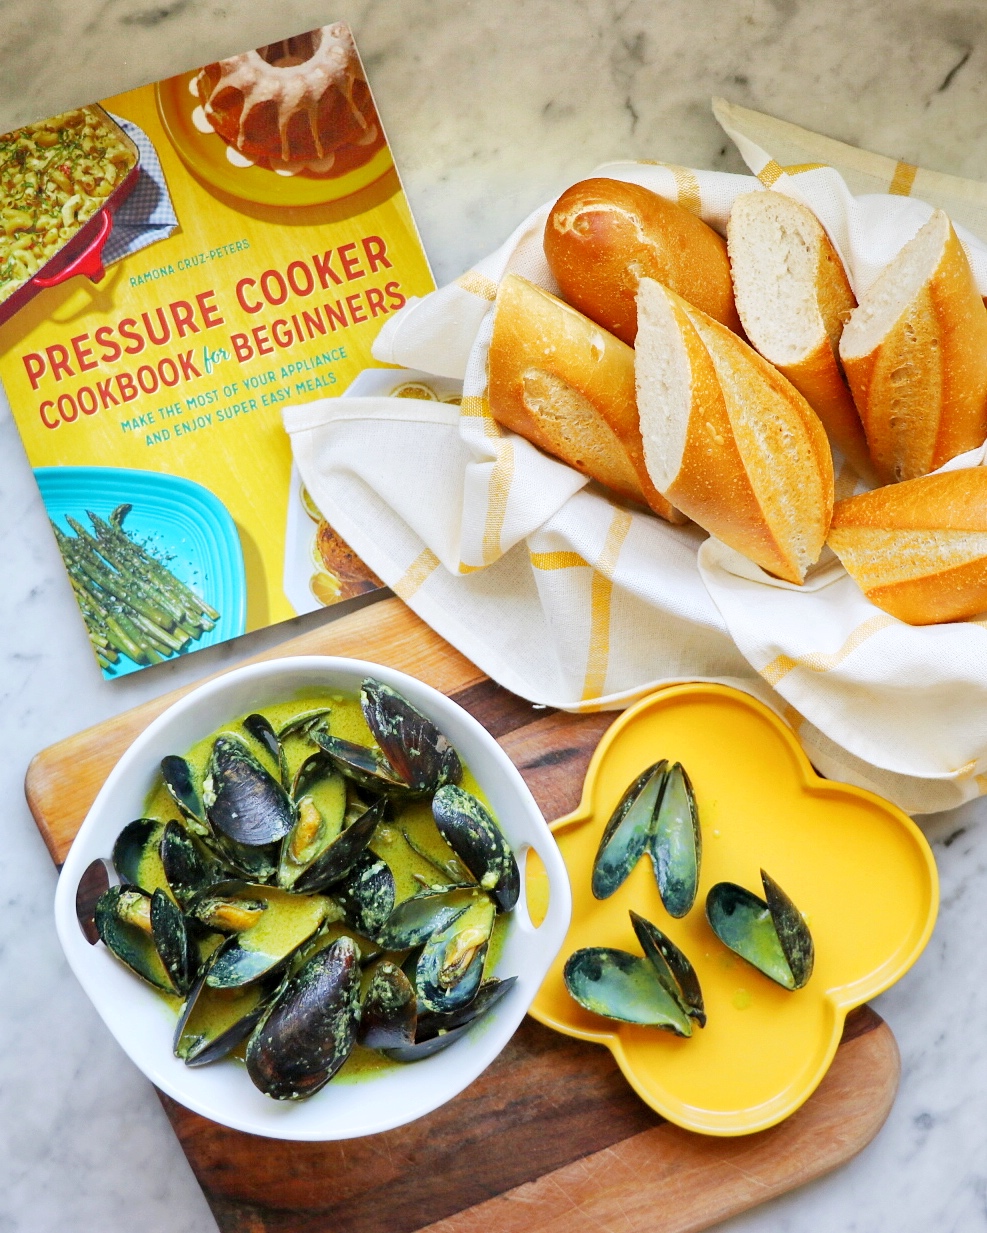 Instant Pot Mussels in Coconut Curry Sauce from Pressure Cooker Cookbook for Beginners by Ramona Cruz-Peters